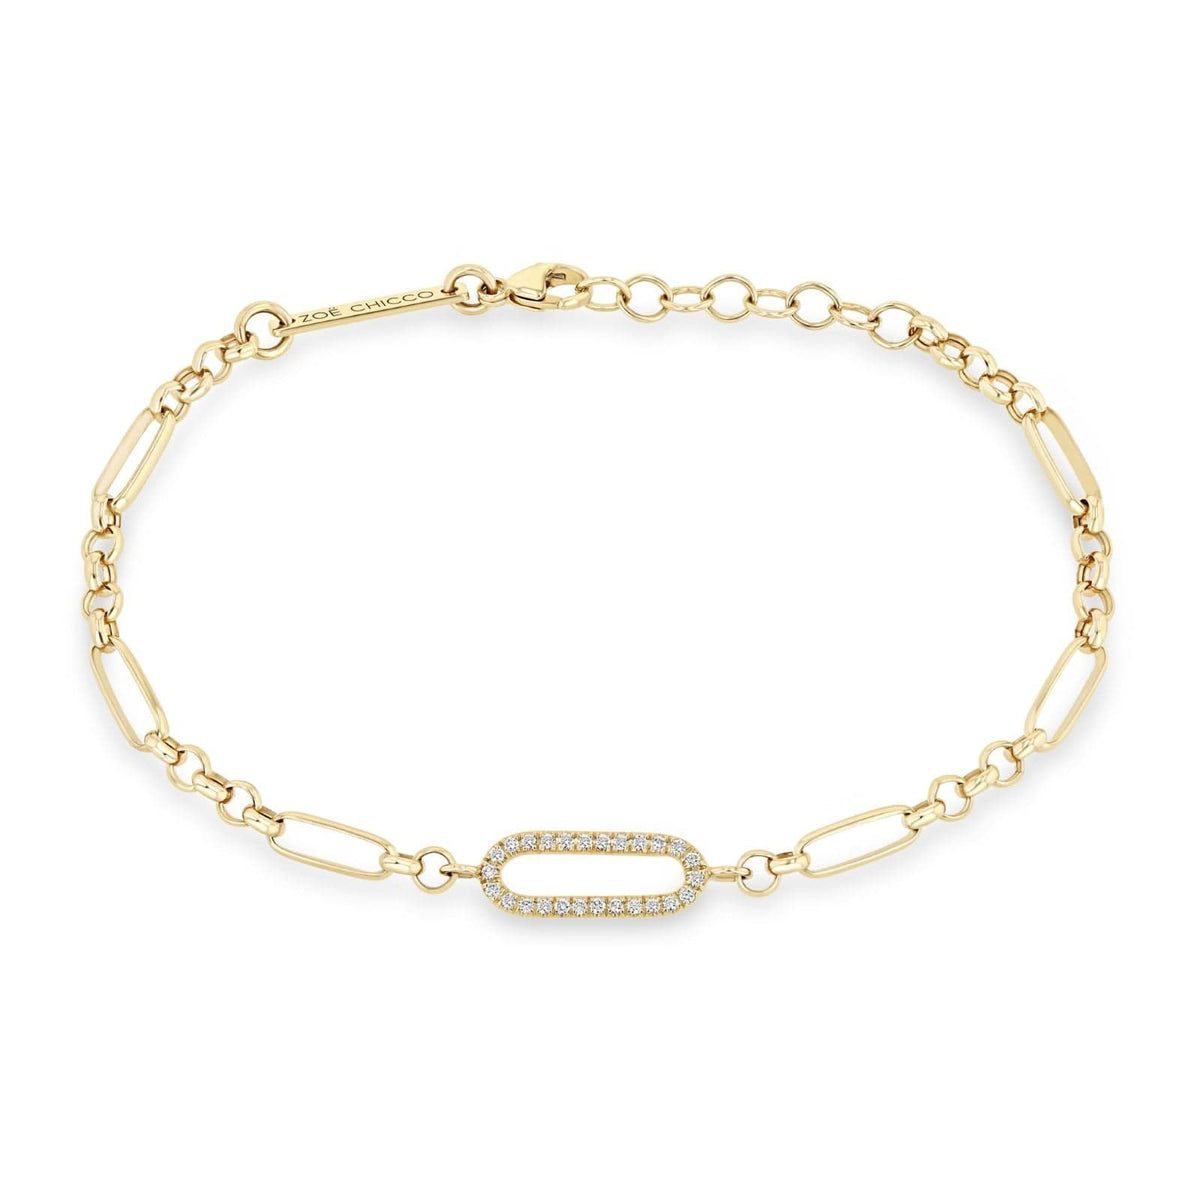 14K Yellow Gold Paperclip and Rolo Chain Bracelet with Pave Diamond Link